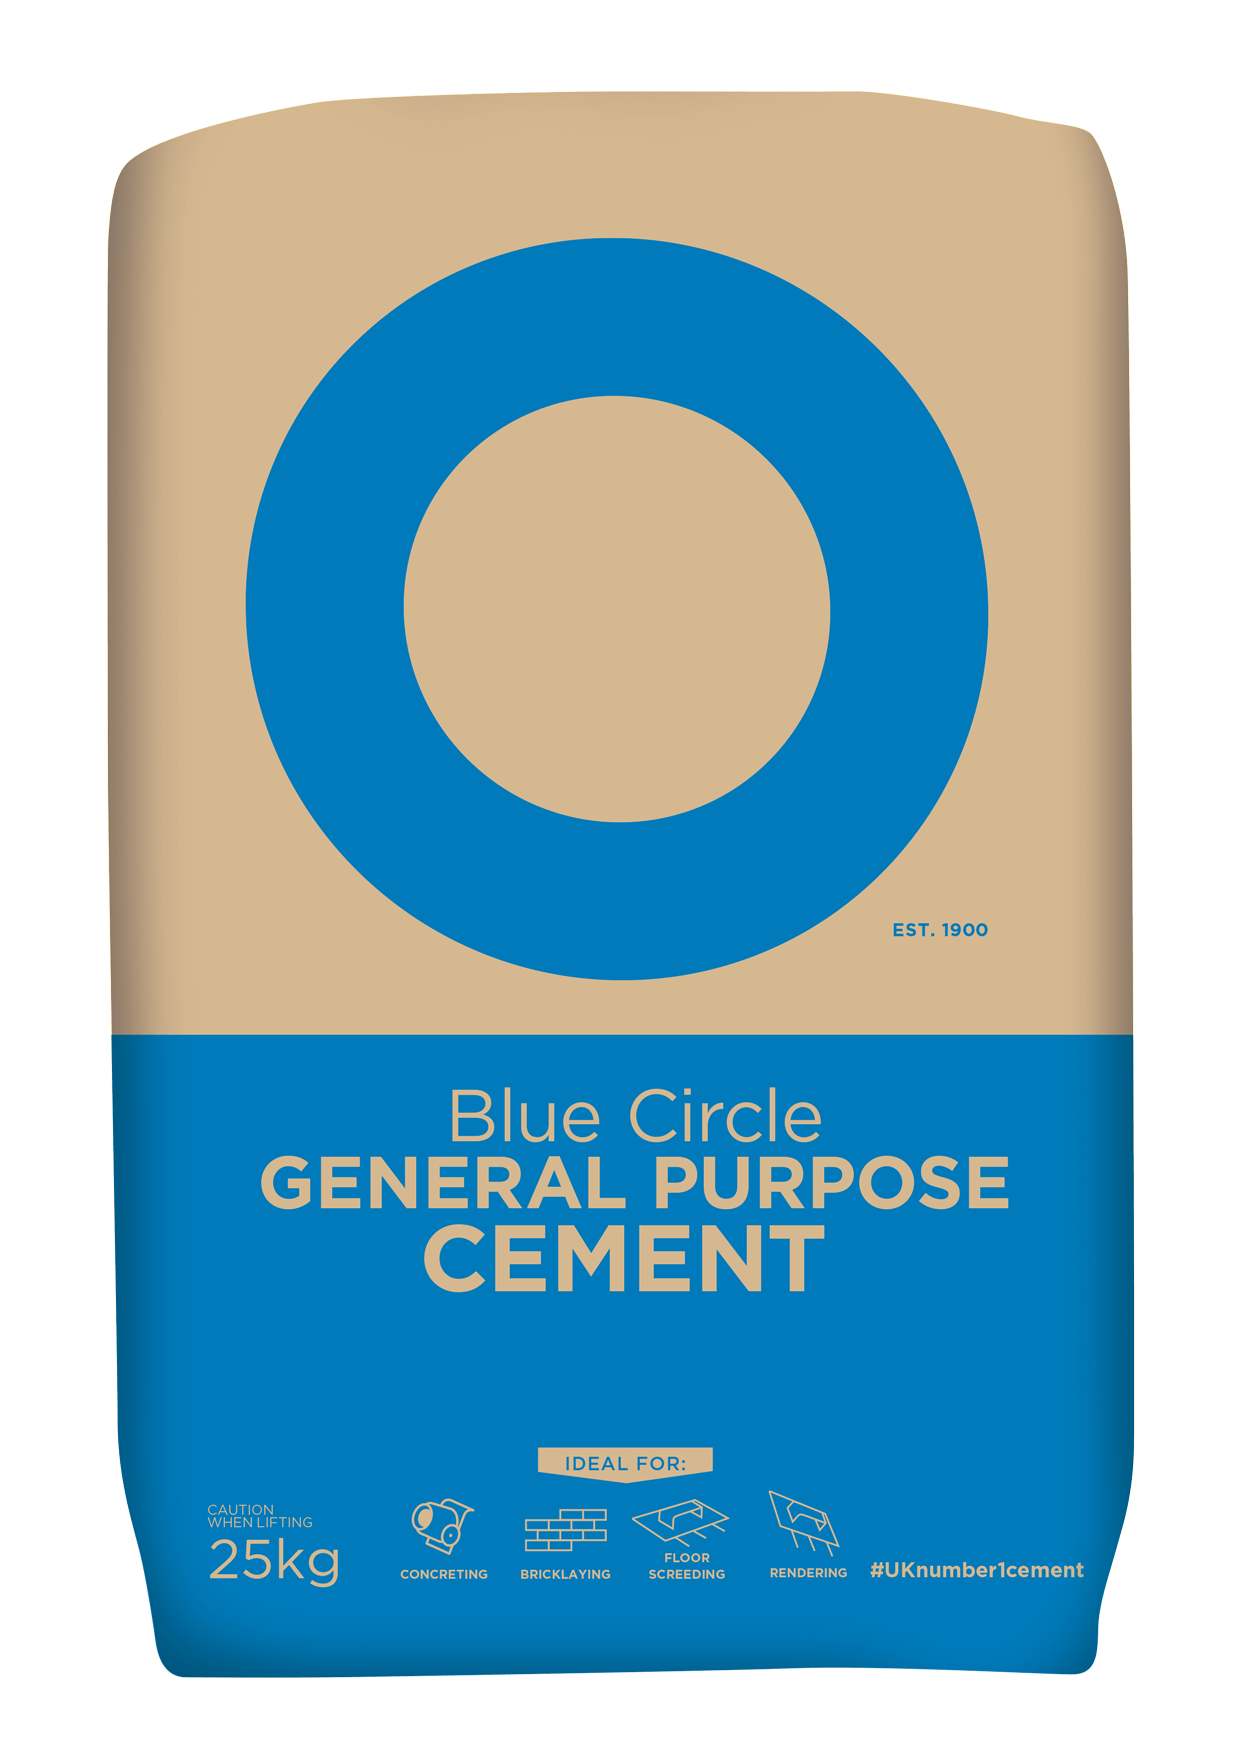 GENERAL PURPOSE CEMENT - THE DEPENDABLE ONE